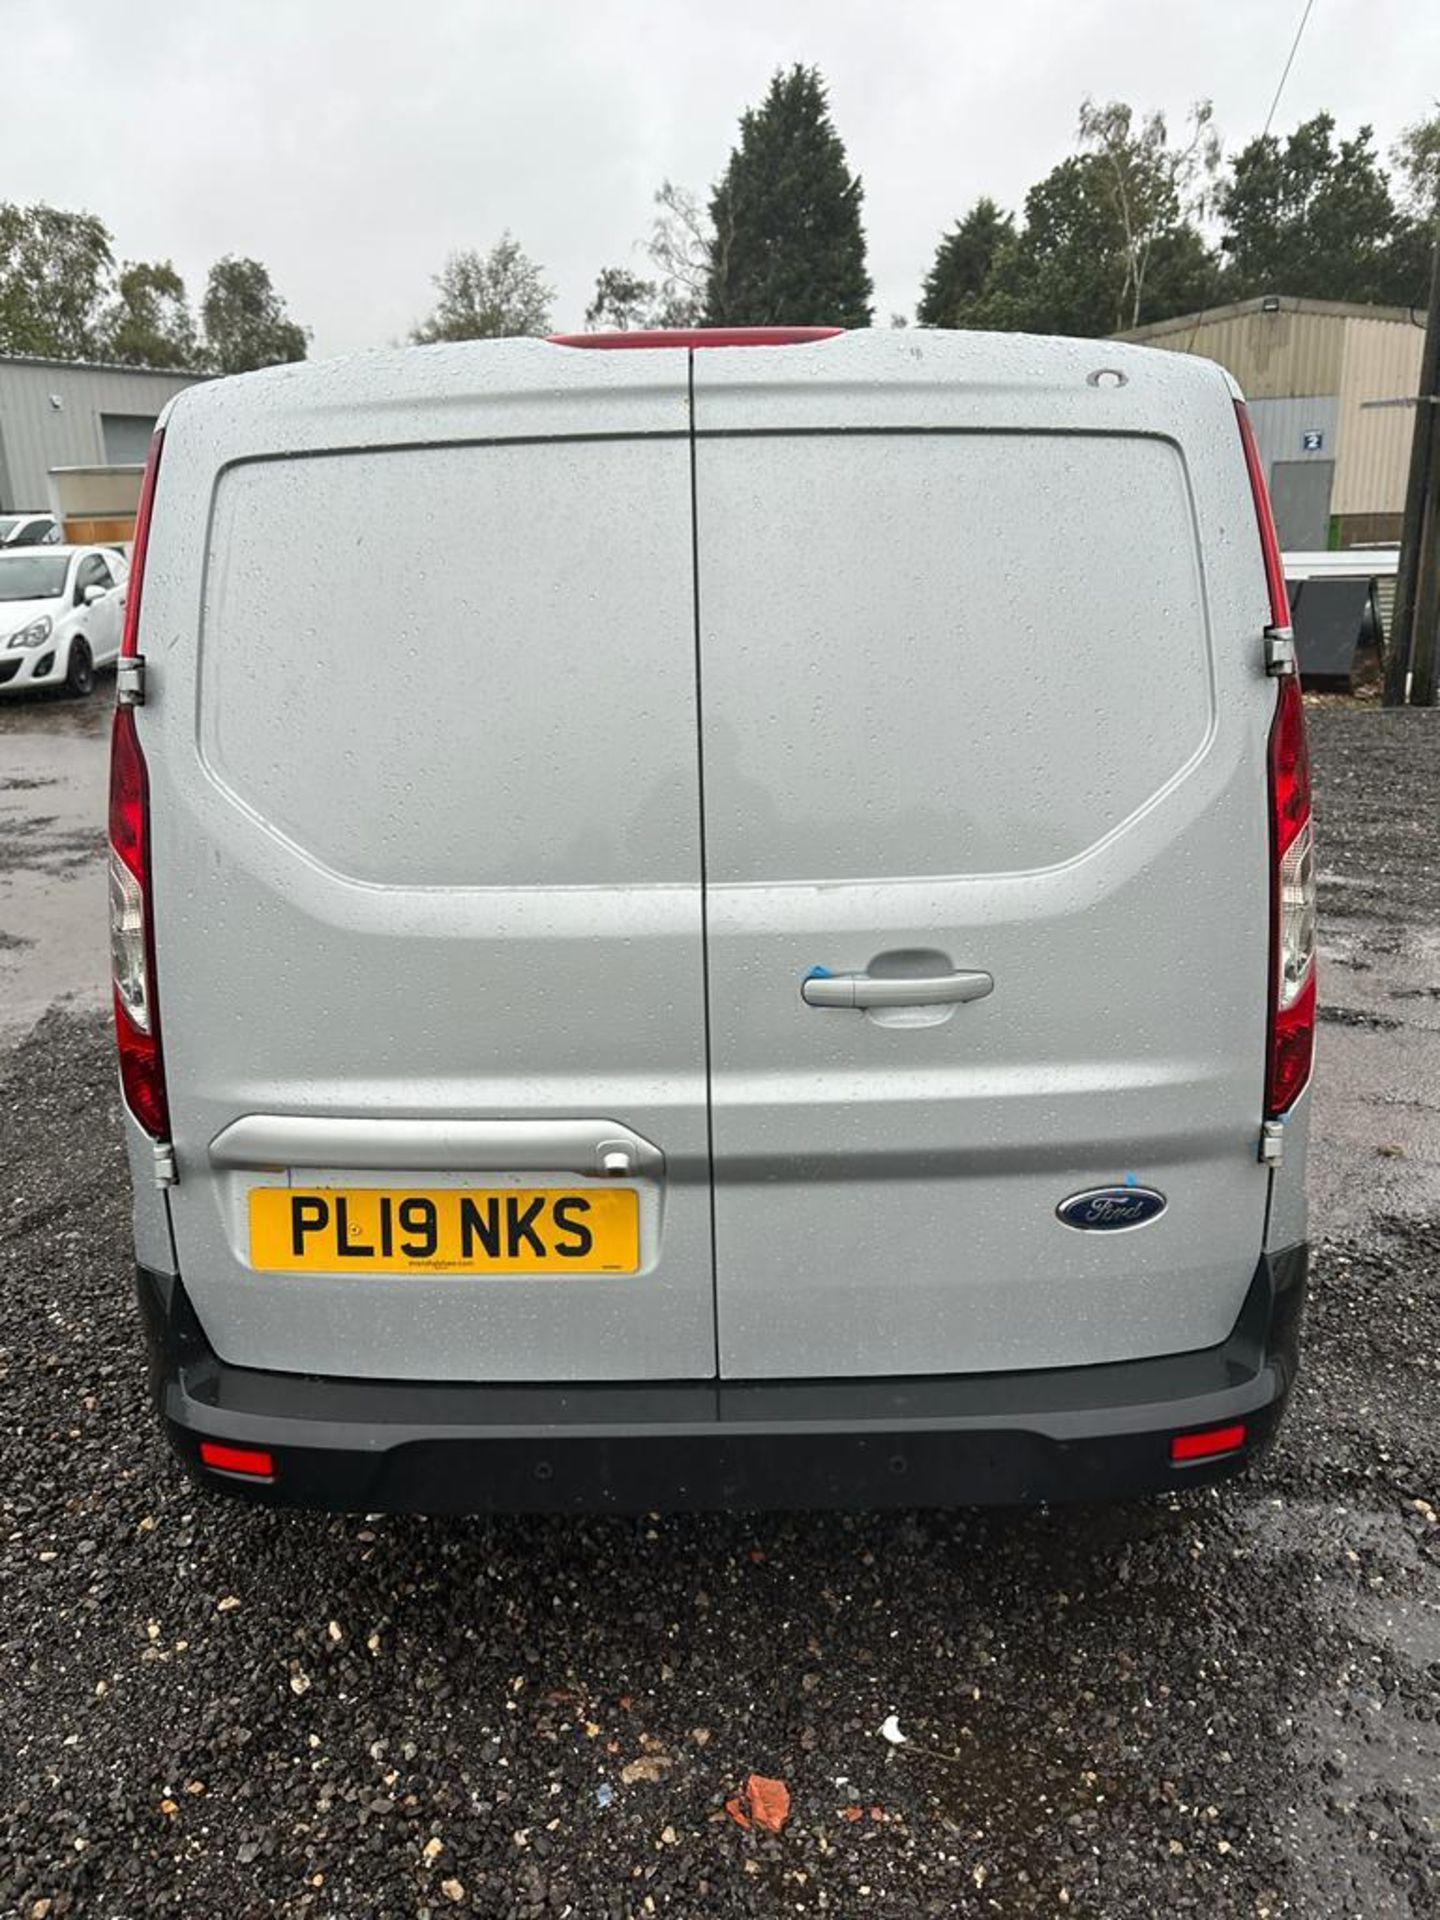 2019 19 FORD TRANSIT CONNECT LIMITED AUTOMATIC PANEL VAN - 123K MILES - ALLOY WHEELS - AIR CON - Image 3 of 10